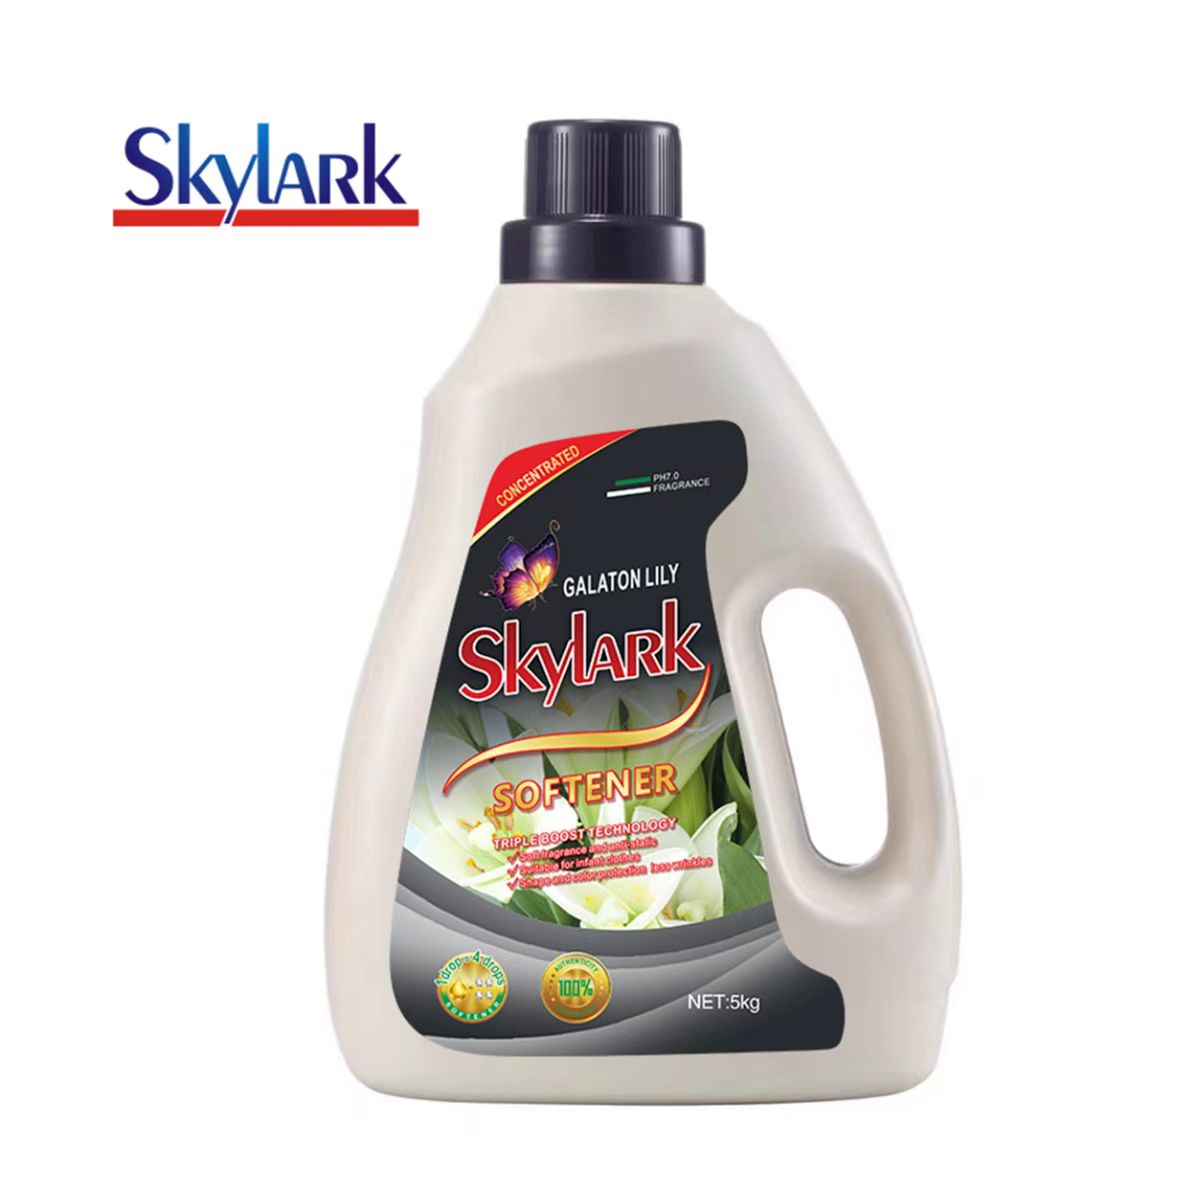 Super Galaton Lily Concentrated Type Fabric Softener With Excellent Performance  – Skylark detail pictures